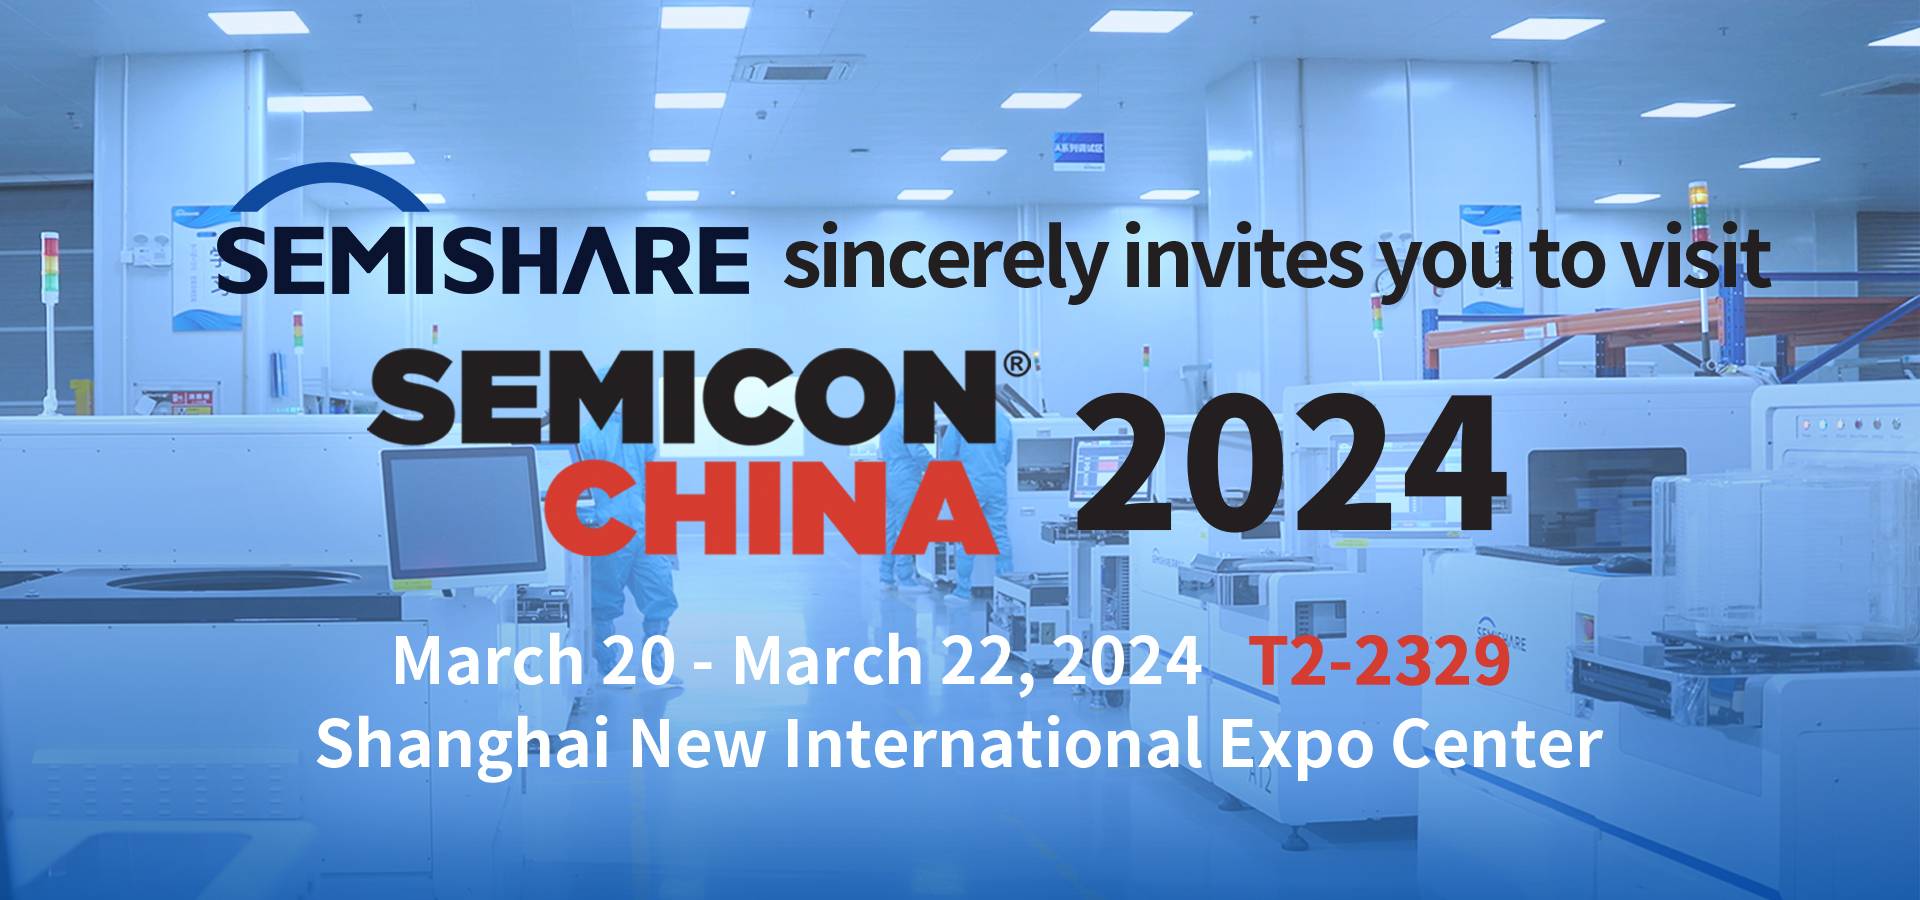 SEMISHARE sincerely invites you to visit SEMICON CHINA 2024 to to discuss cutting-edge wafer test solutions!